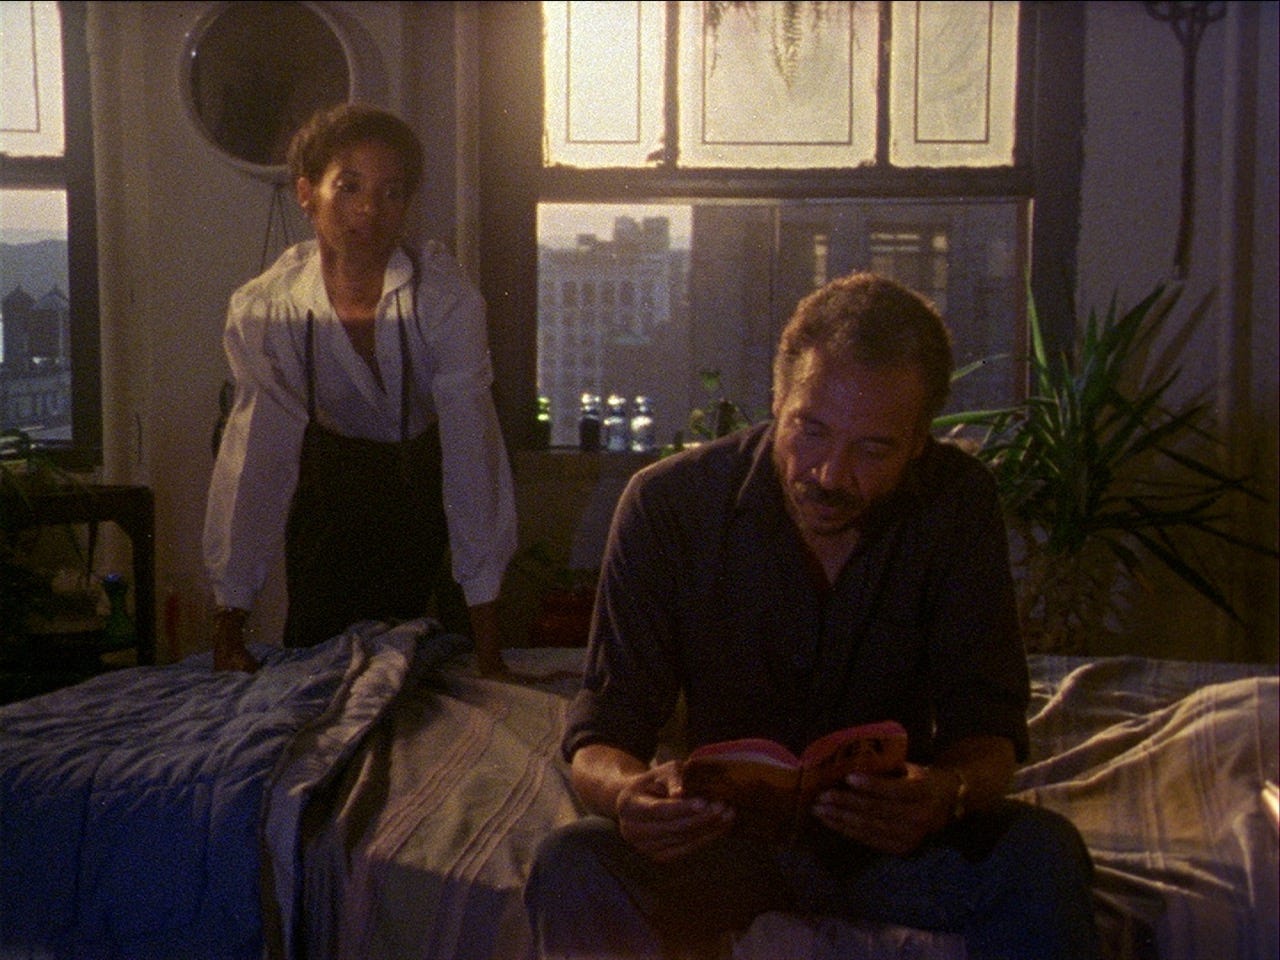 Seret Scott leans over the bed that Bill Gunn is seated on in Losing Ground (1982)